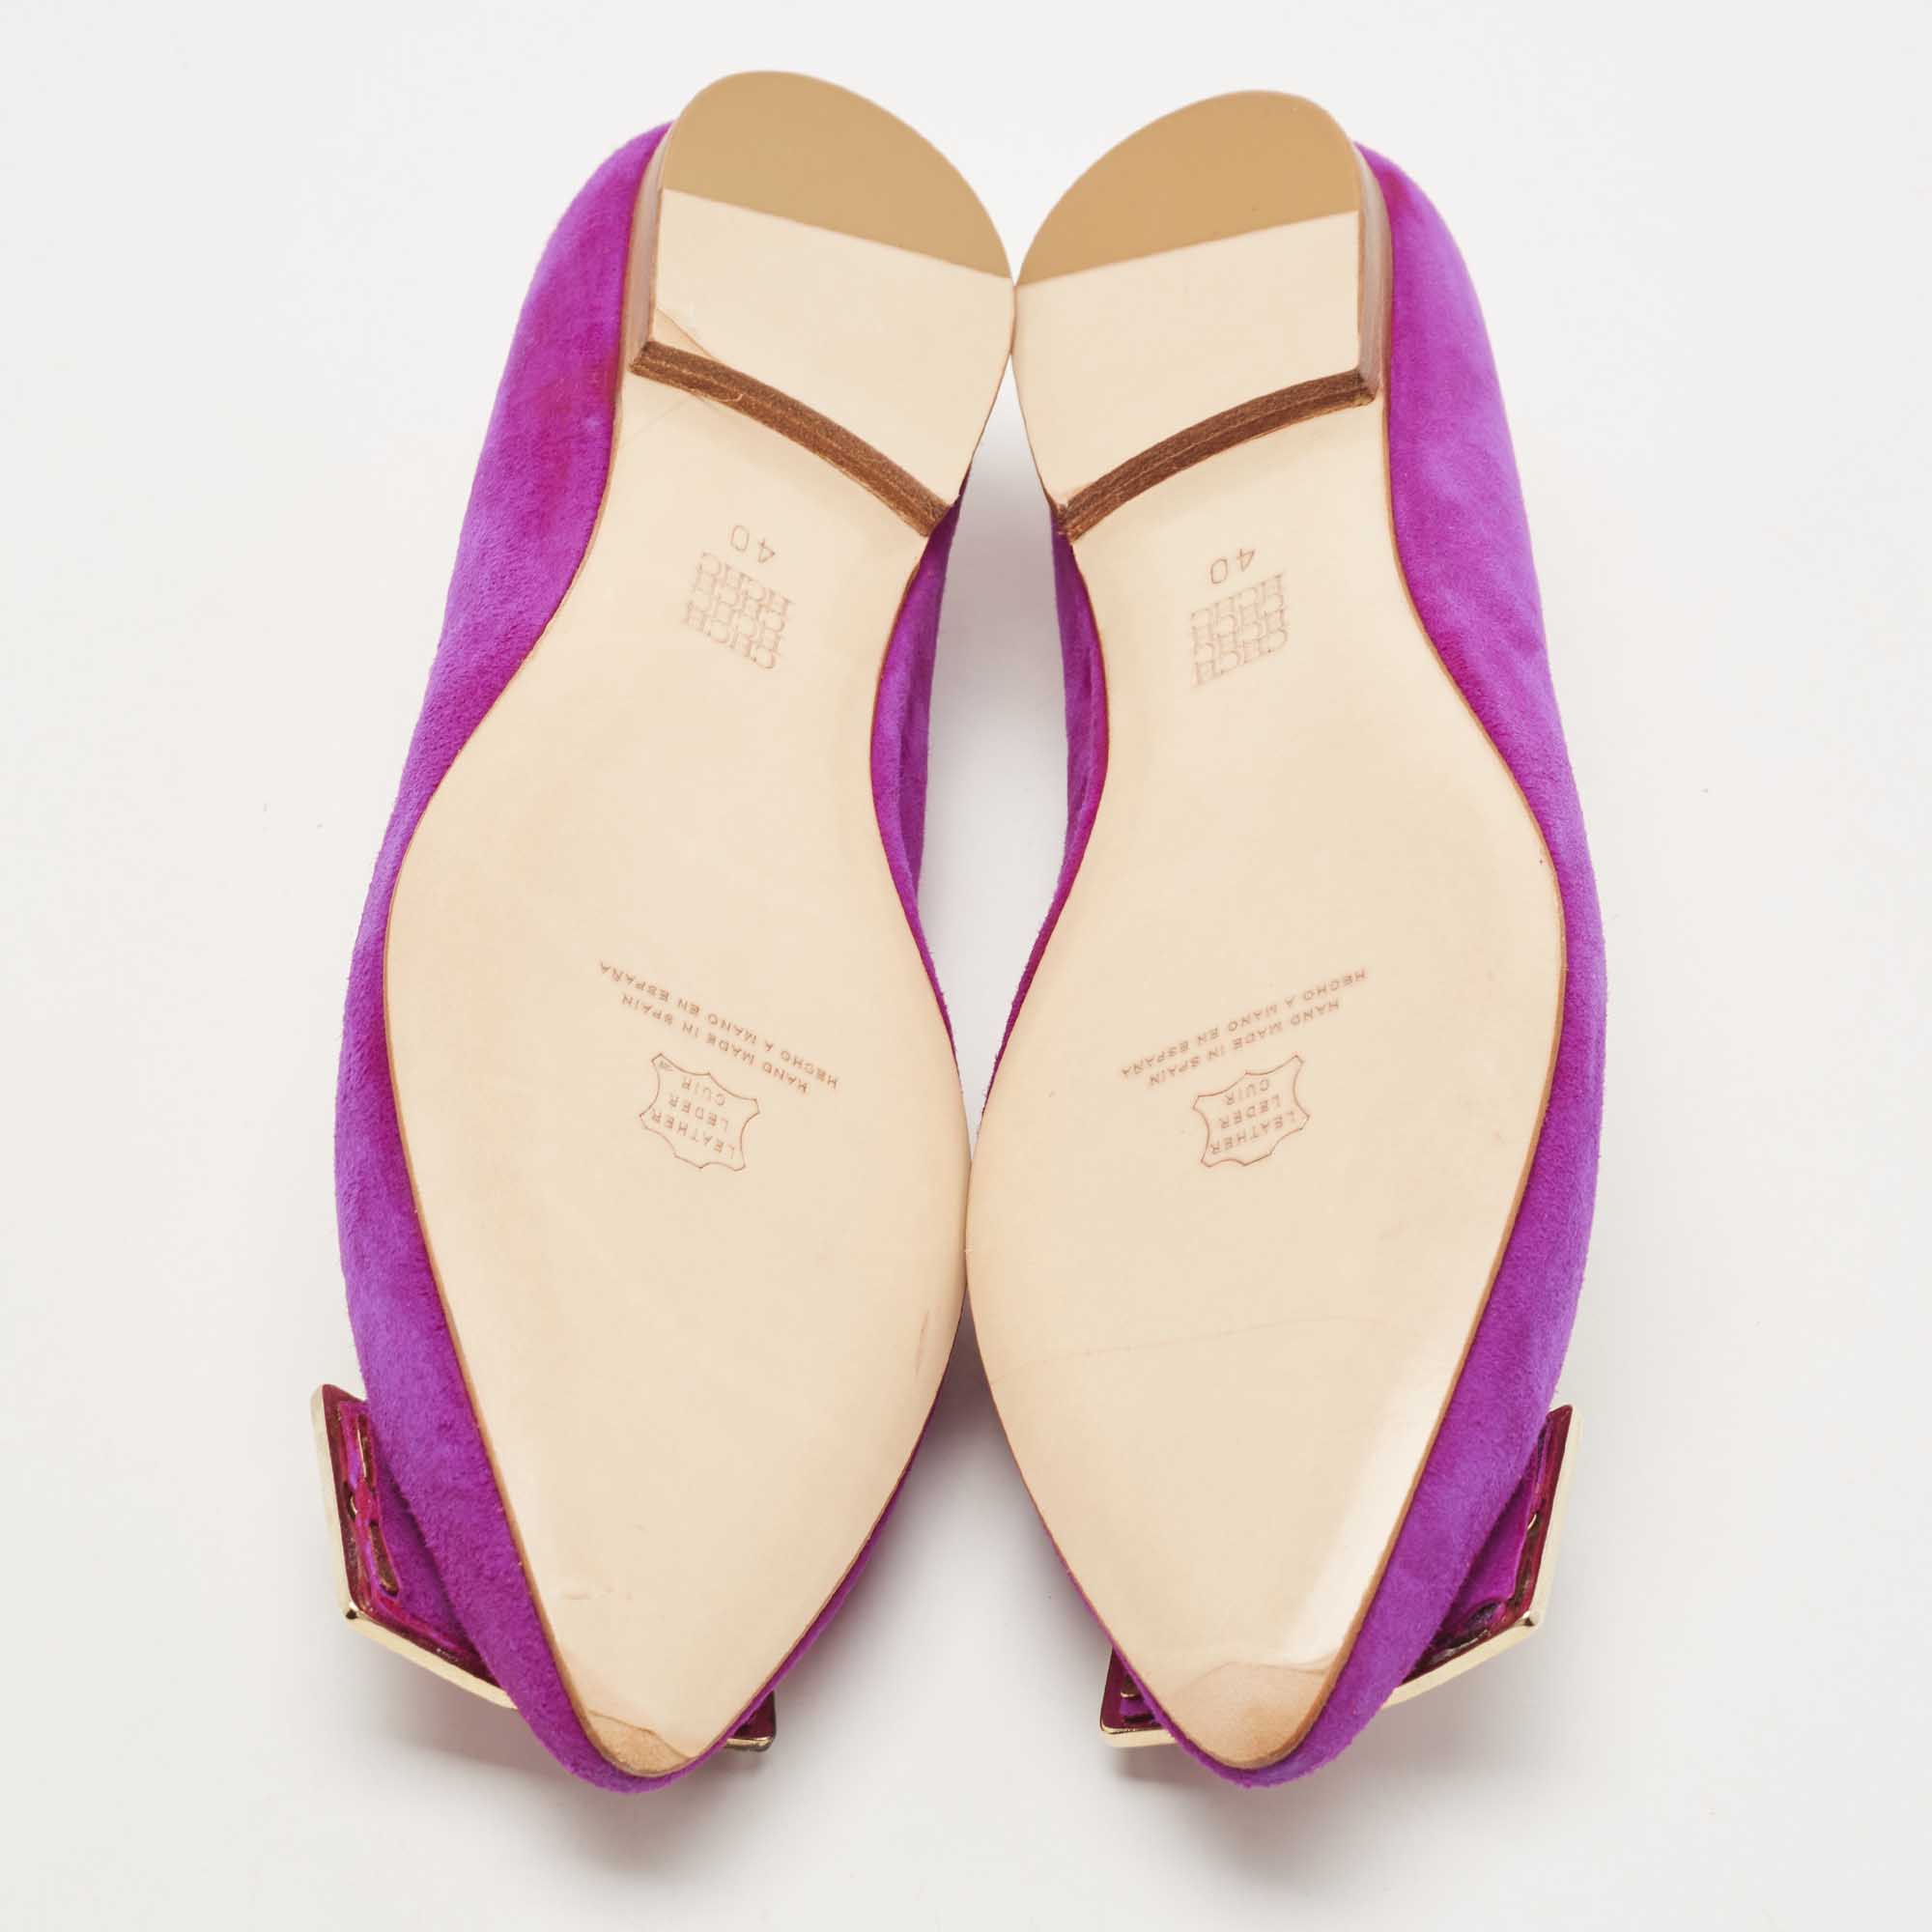 CH Carolina Herrera Pink Suede Pointed Toe Ballet Flats Size 40